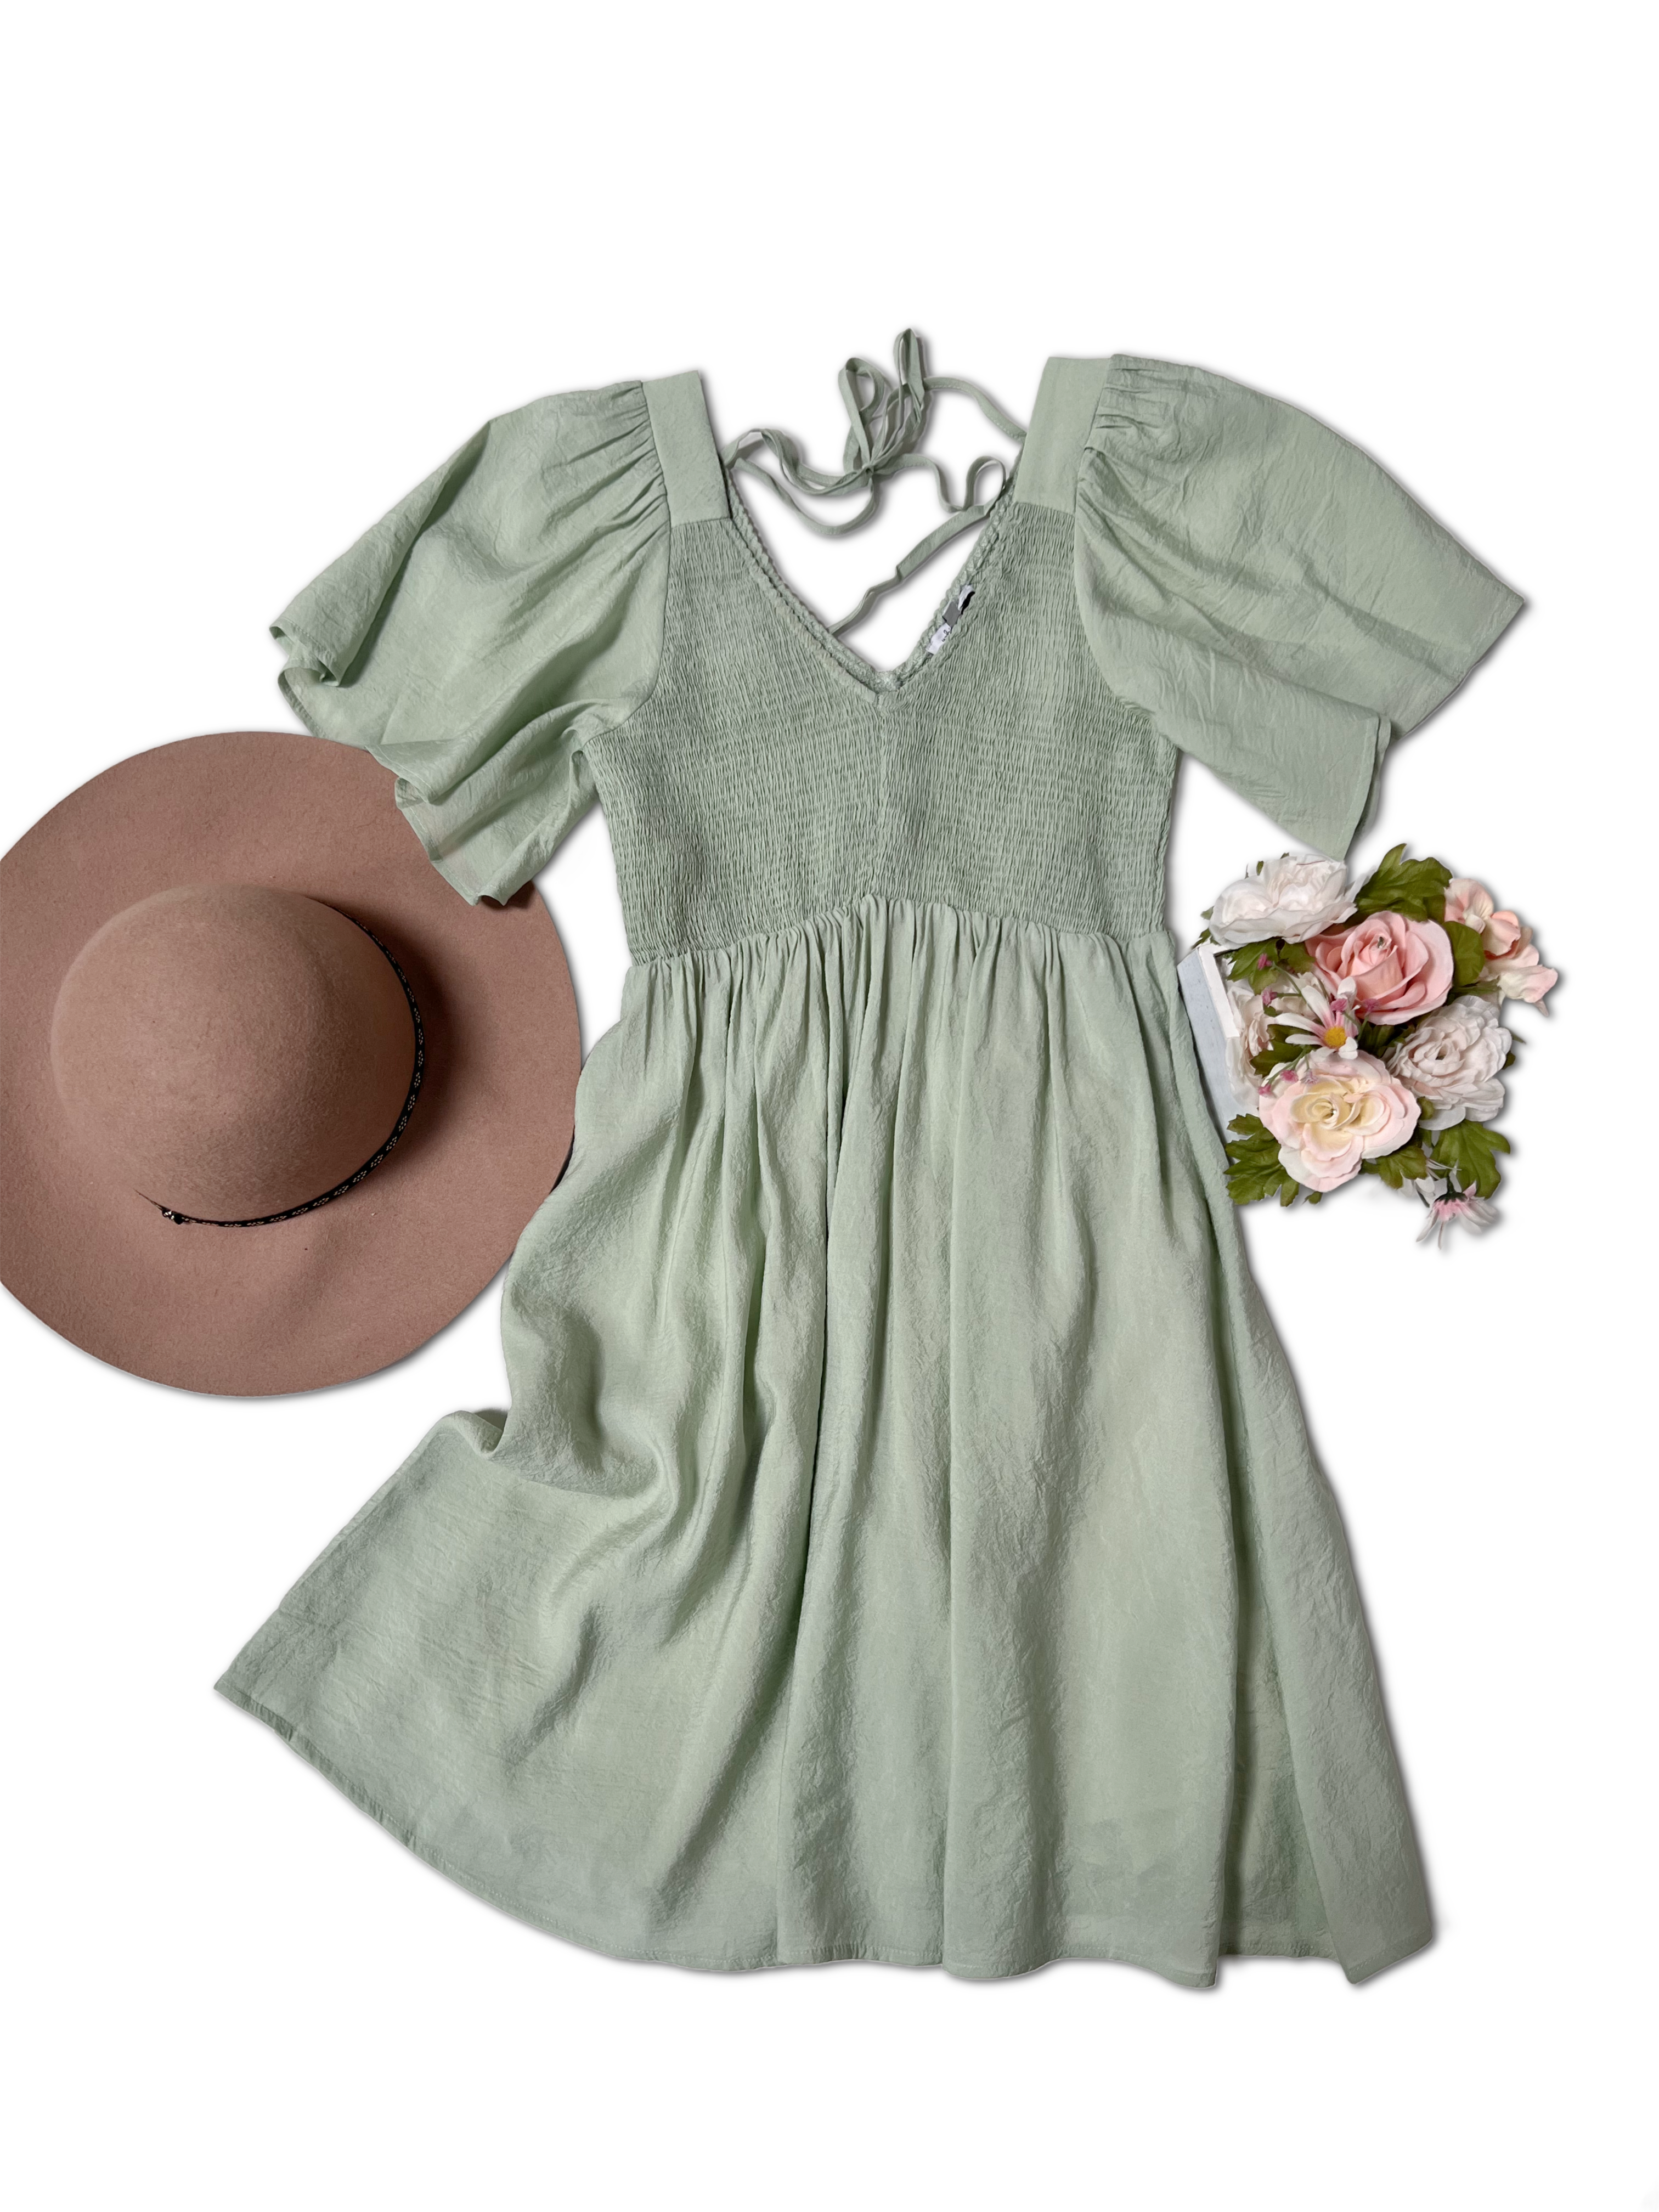 Tiana Spring Dress  Boutique Simplified   